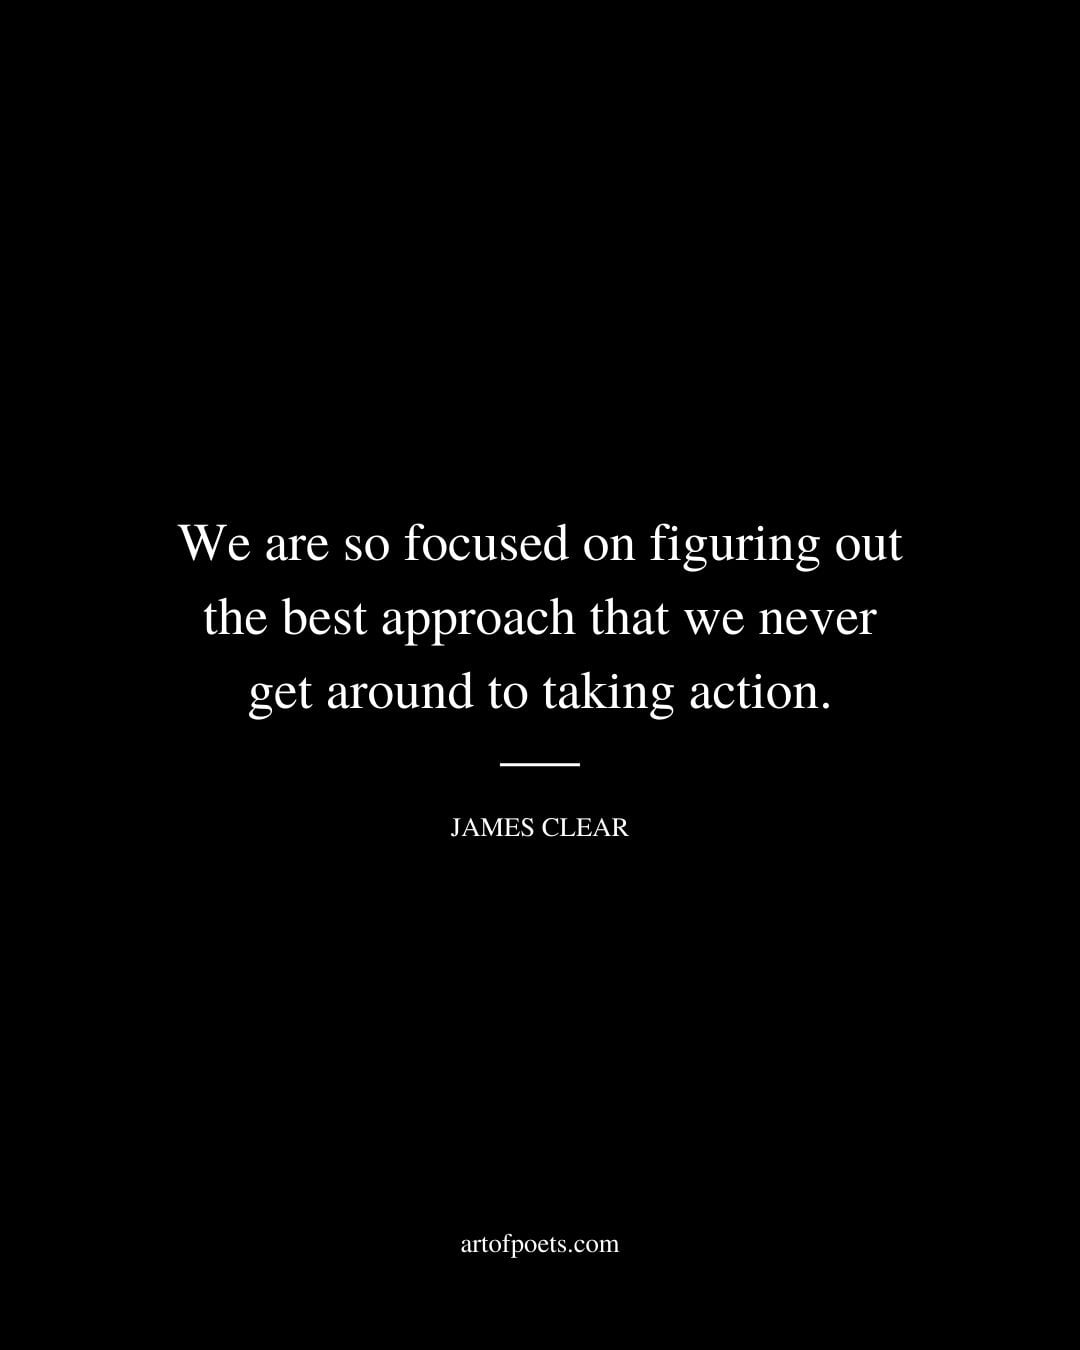 We are so focused on figuring out the best approach that we never get around to taking action